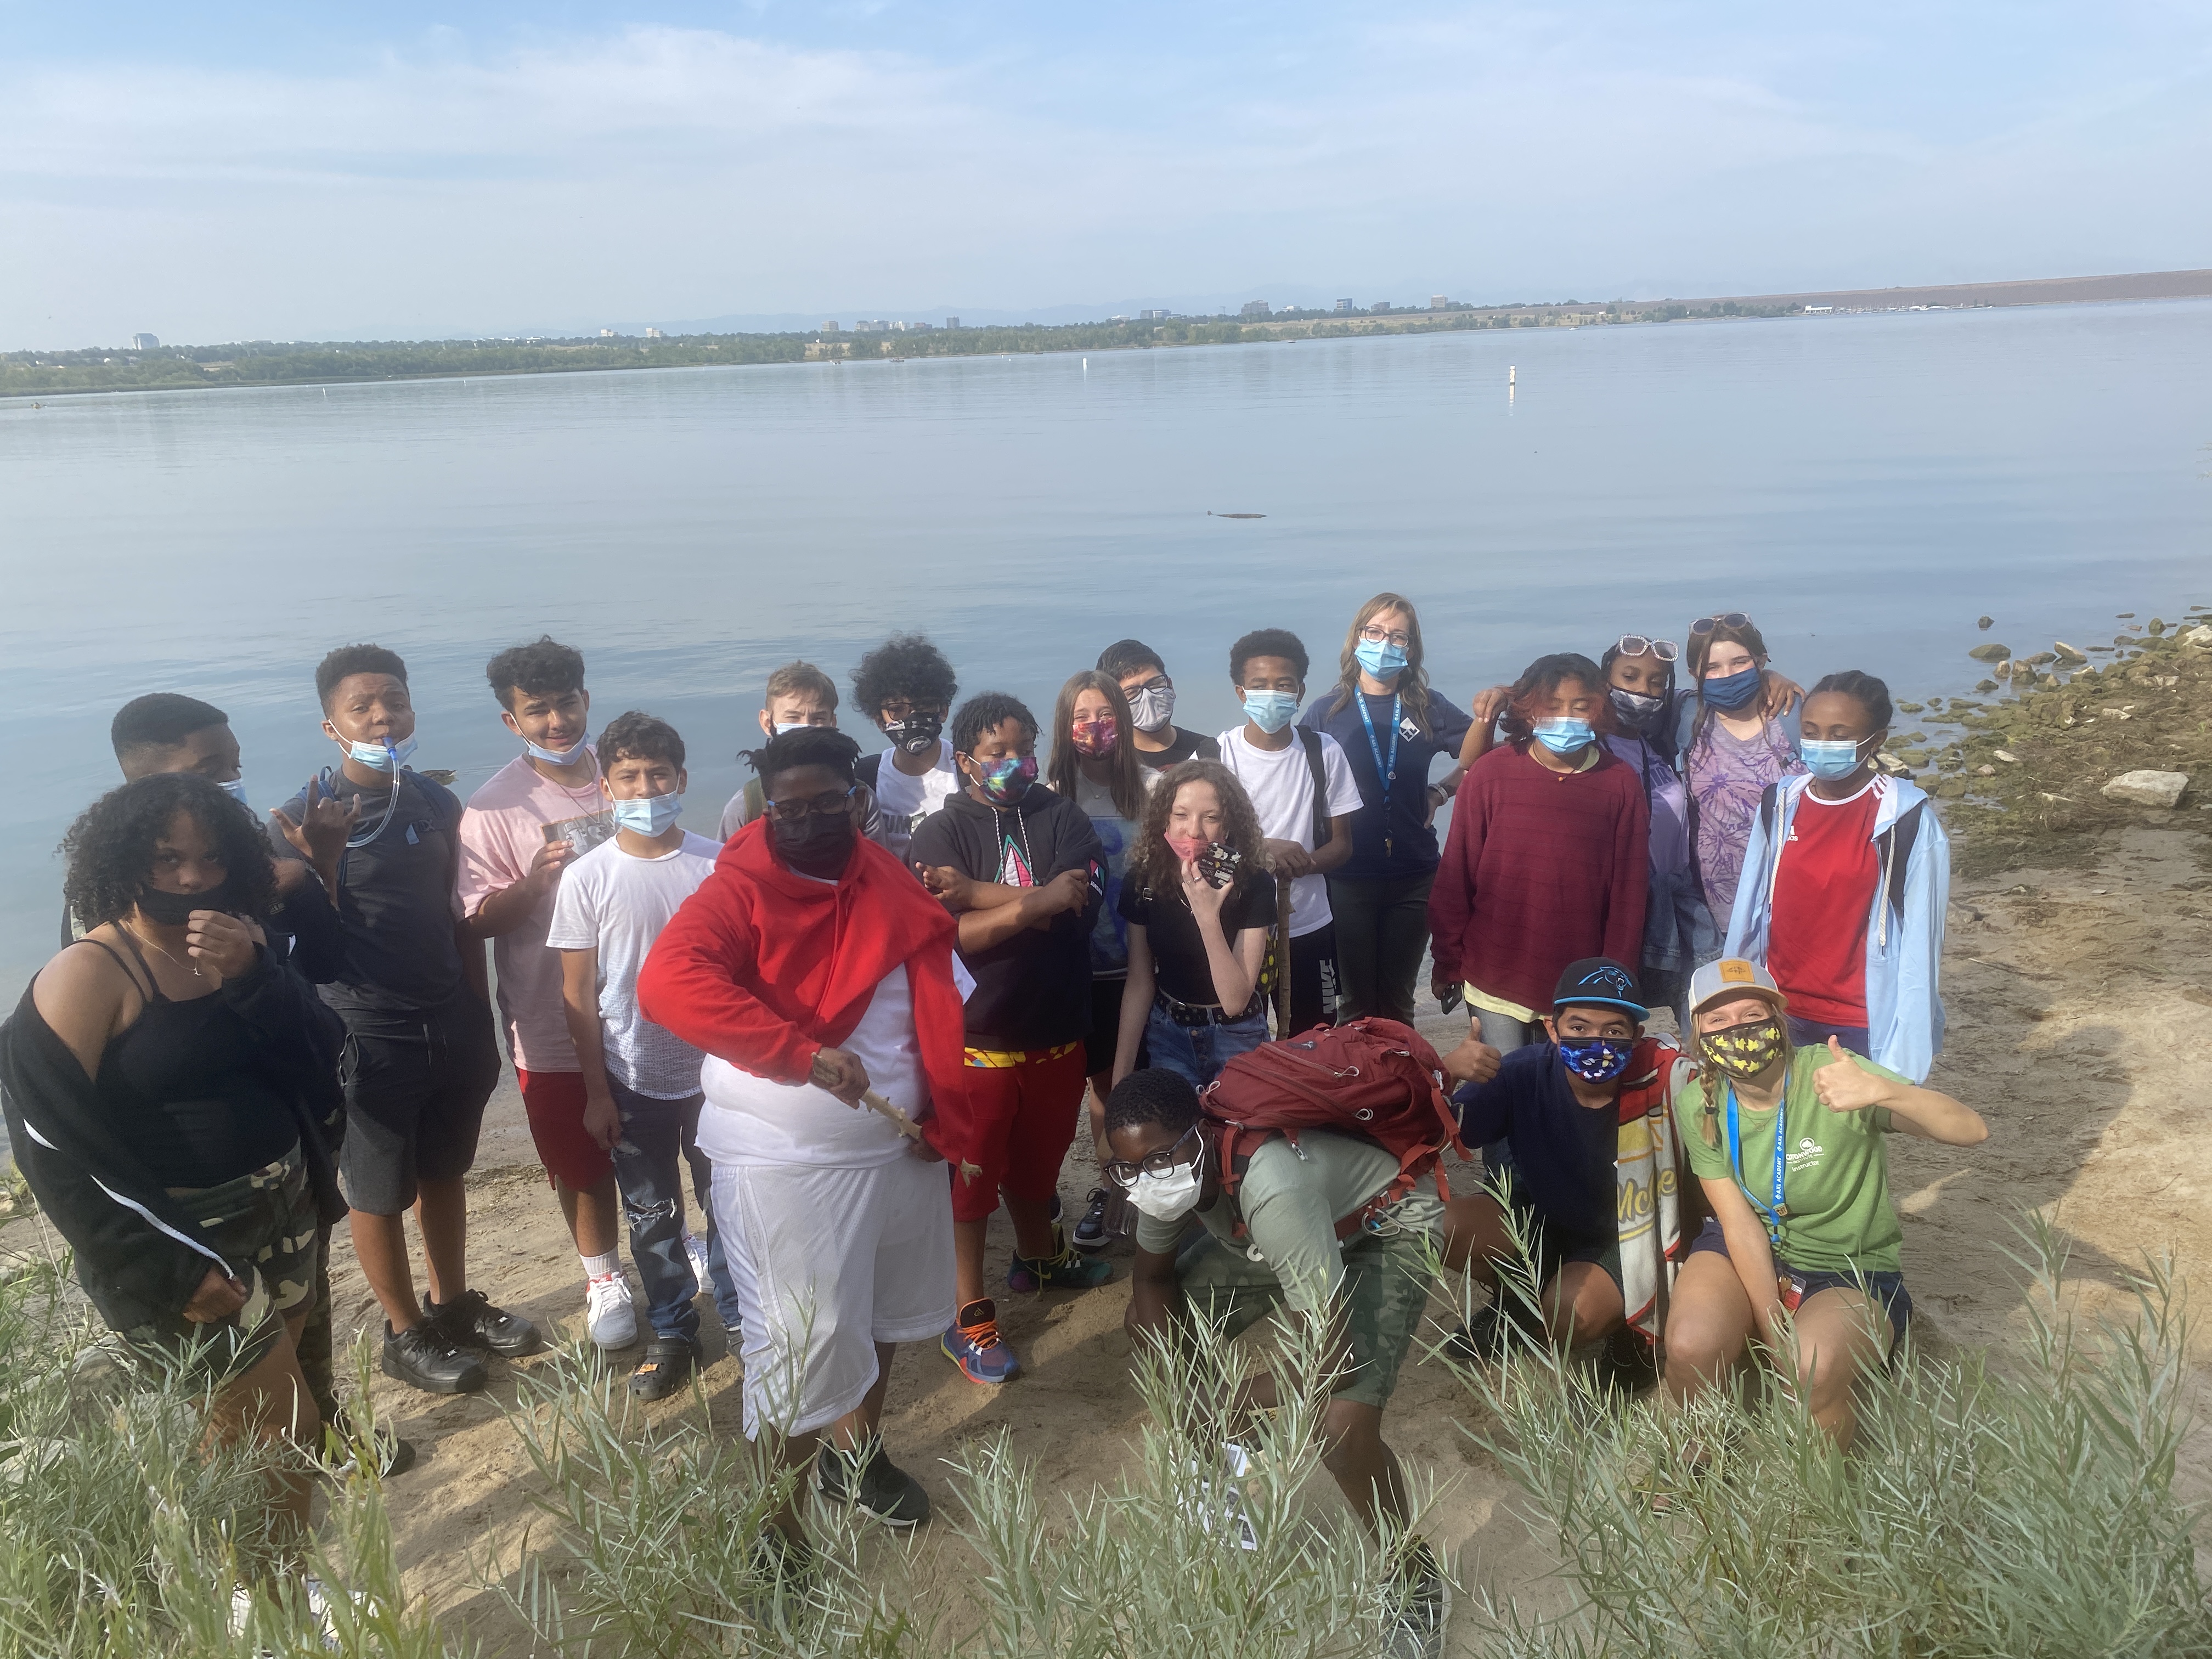 Students on the shore of Cherry Creek Reservoir